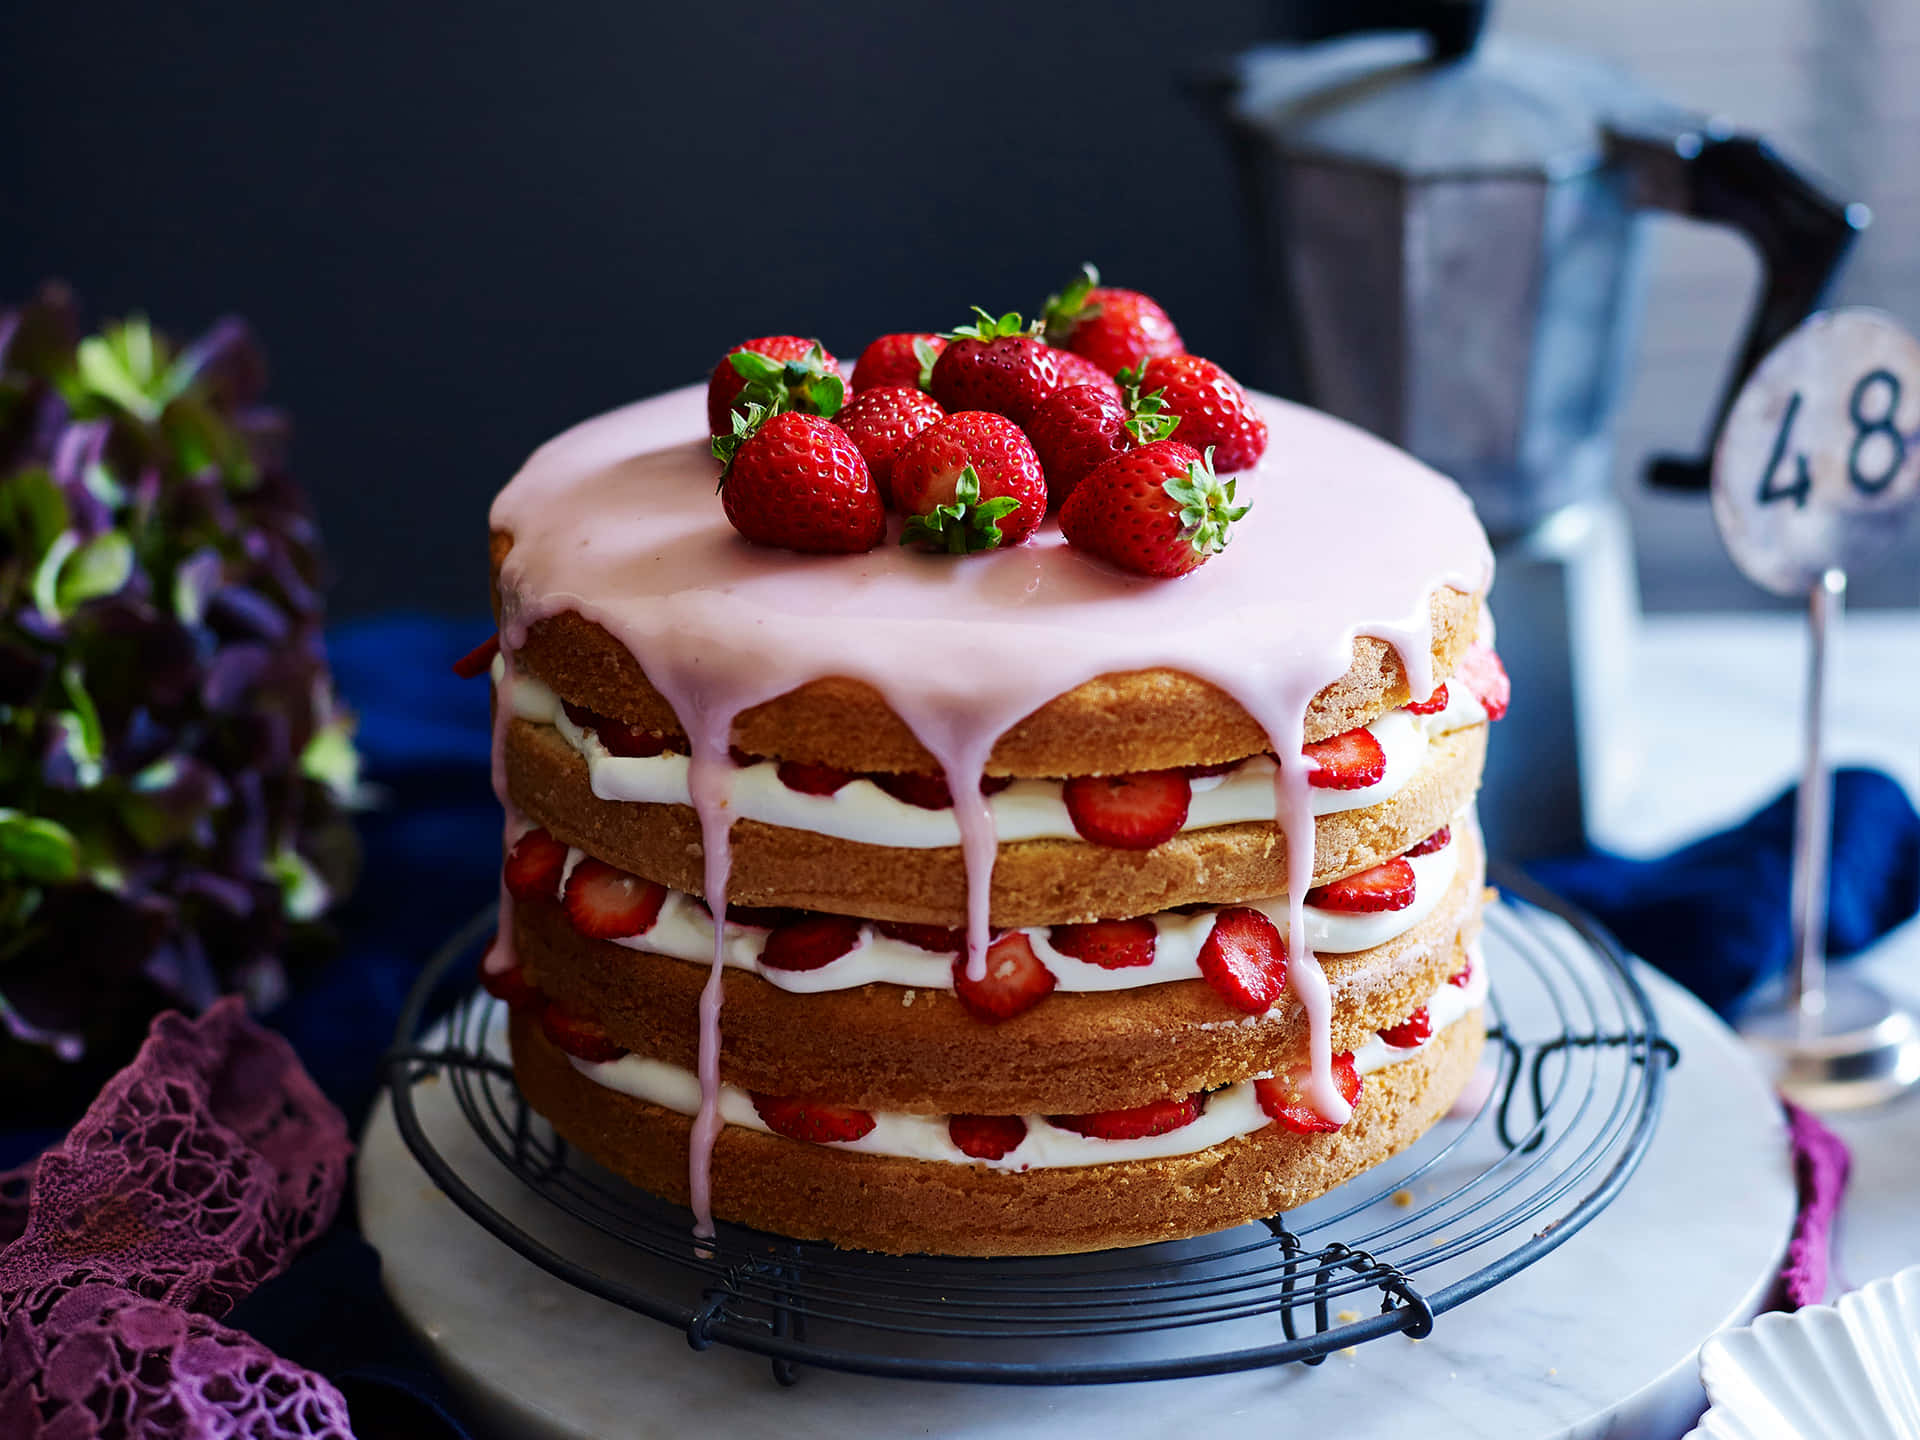 A Cake With Strawberries On It